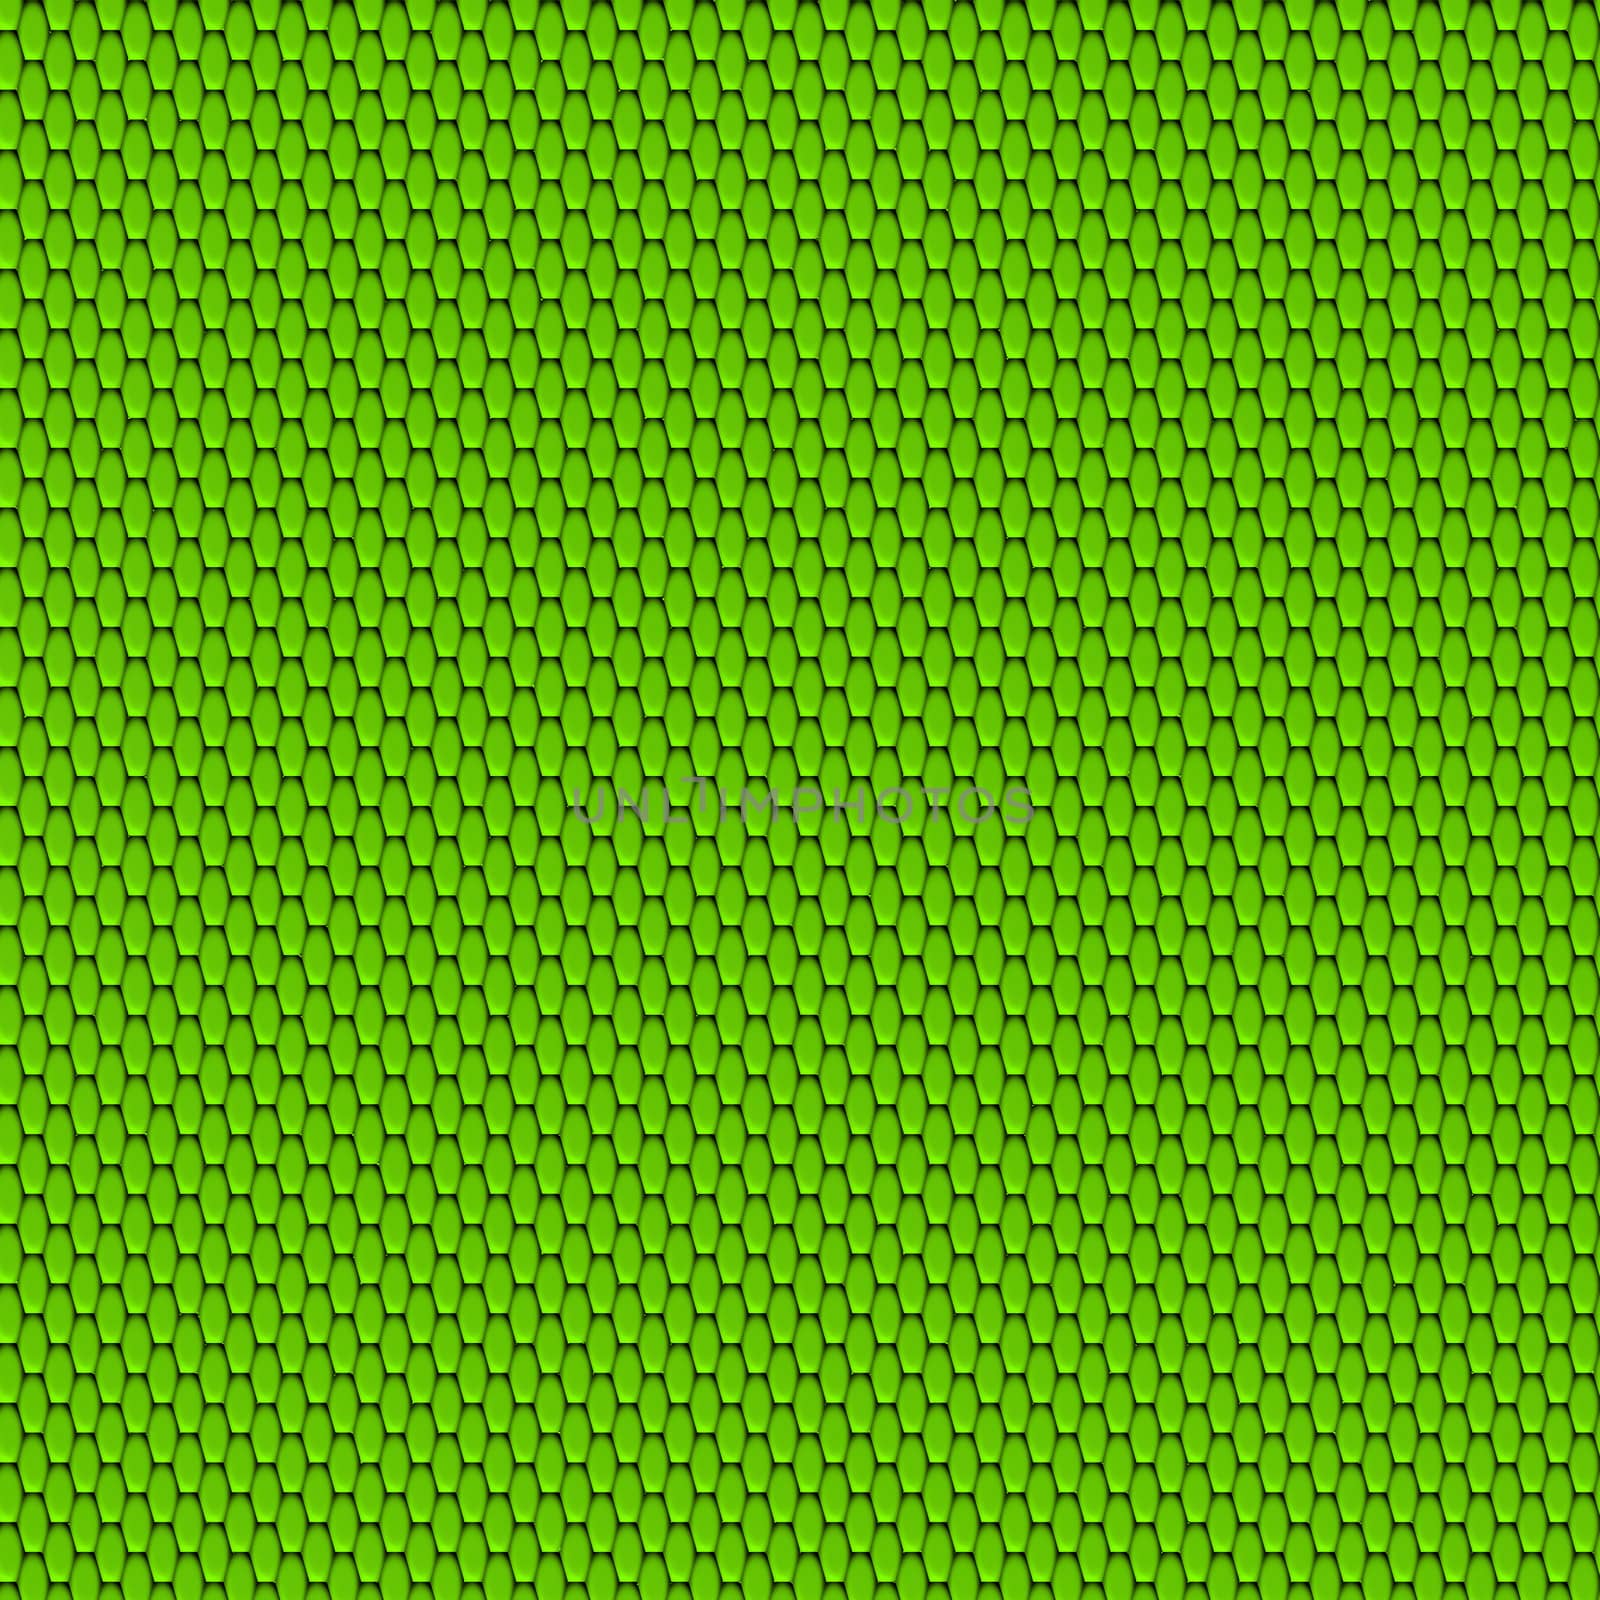 Abstract green seamless simple pattern - tiles